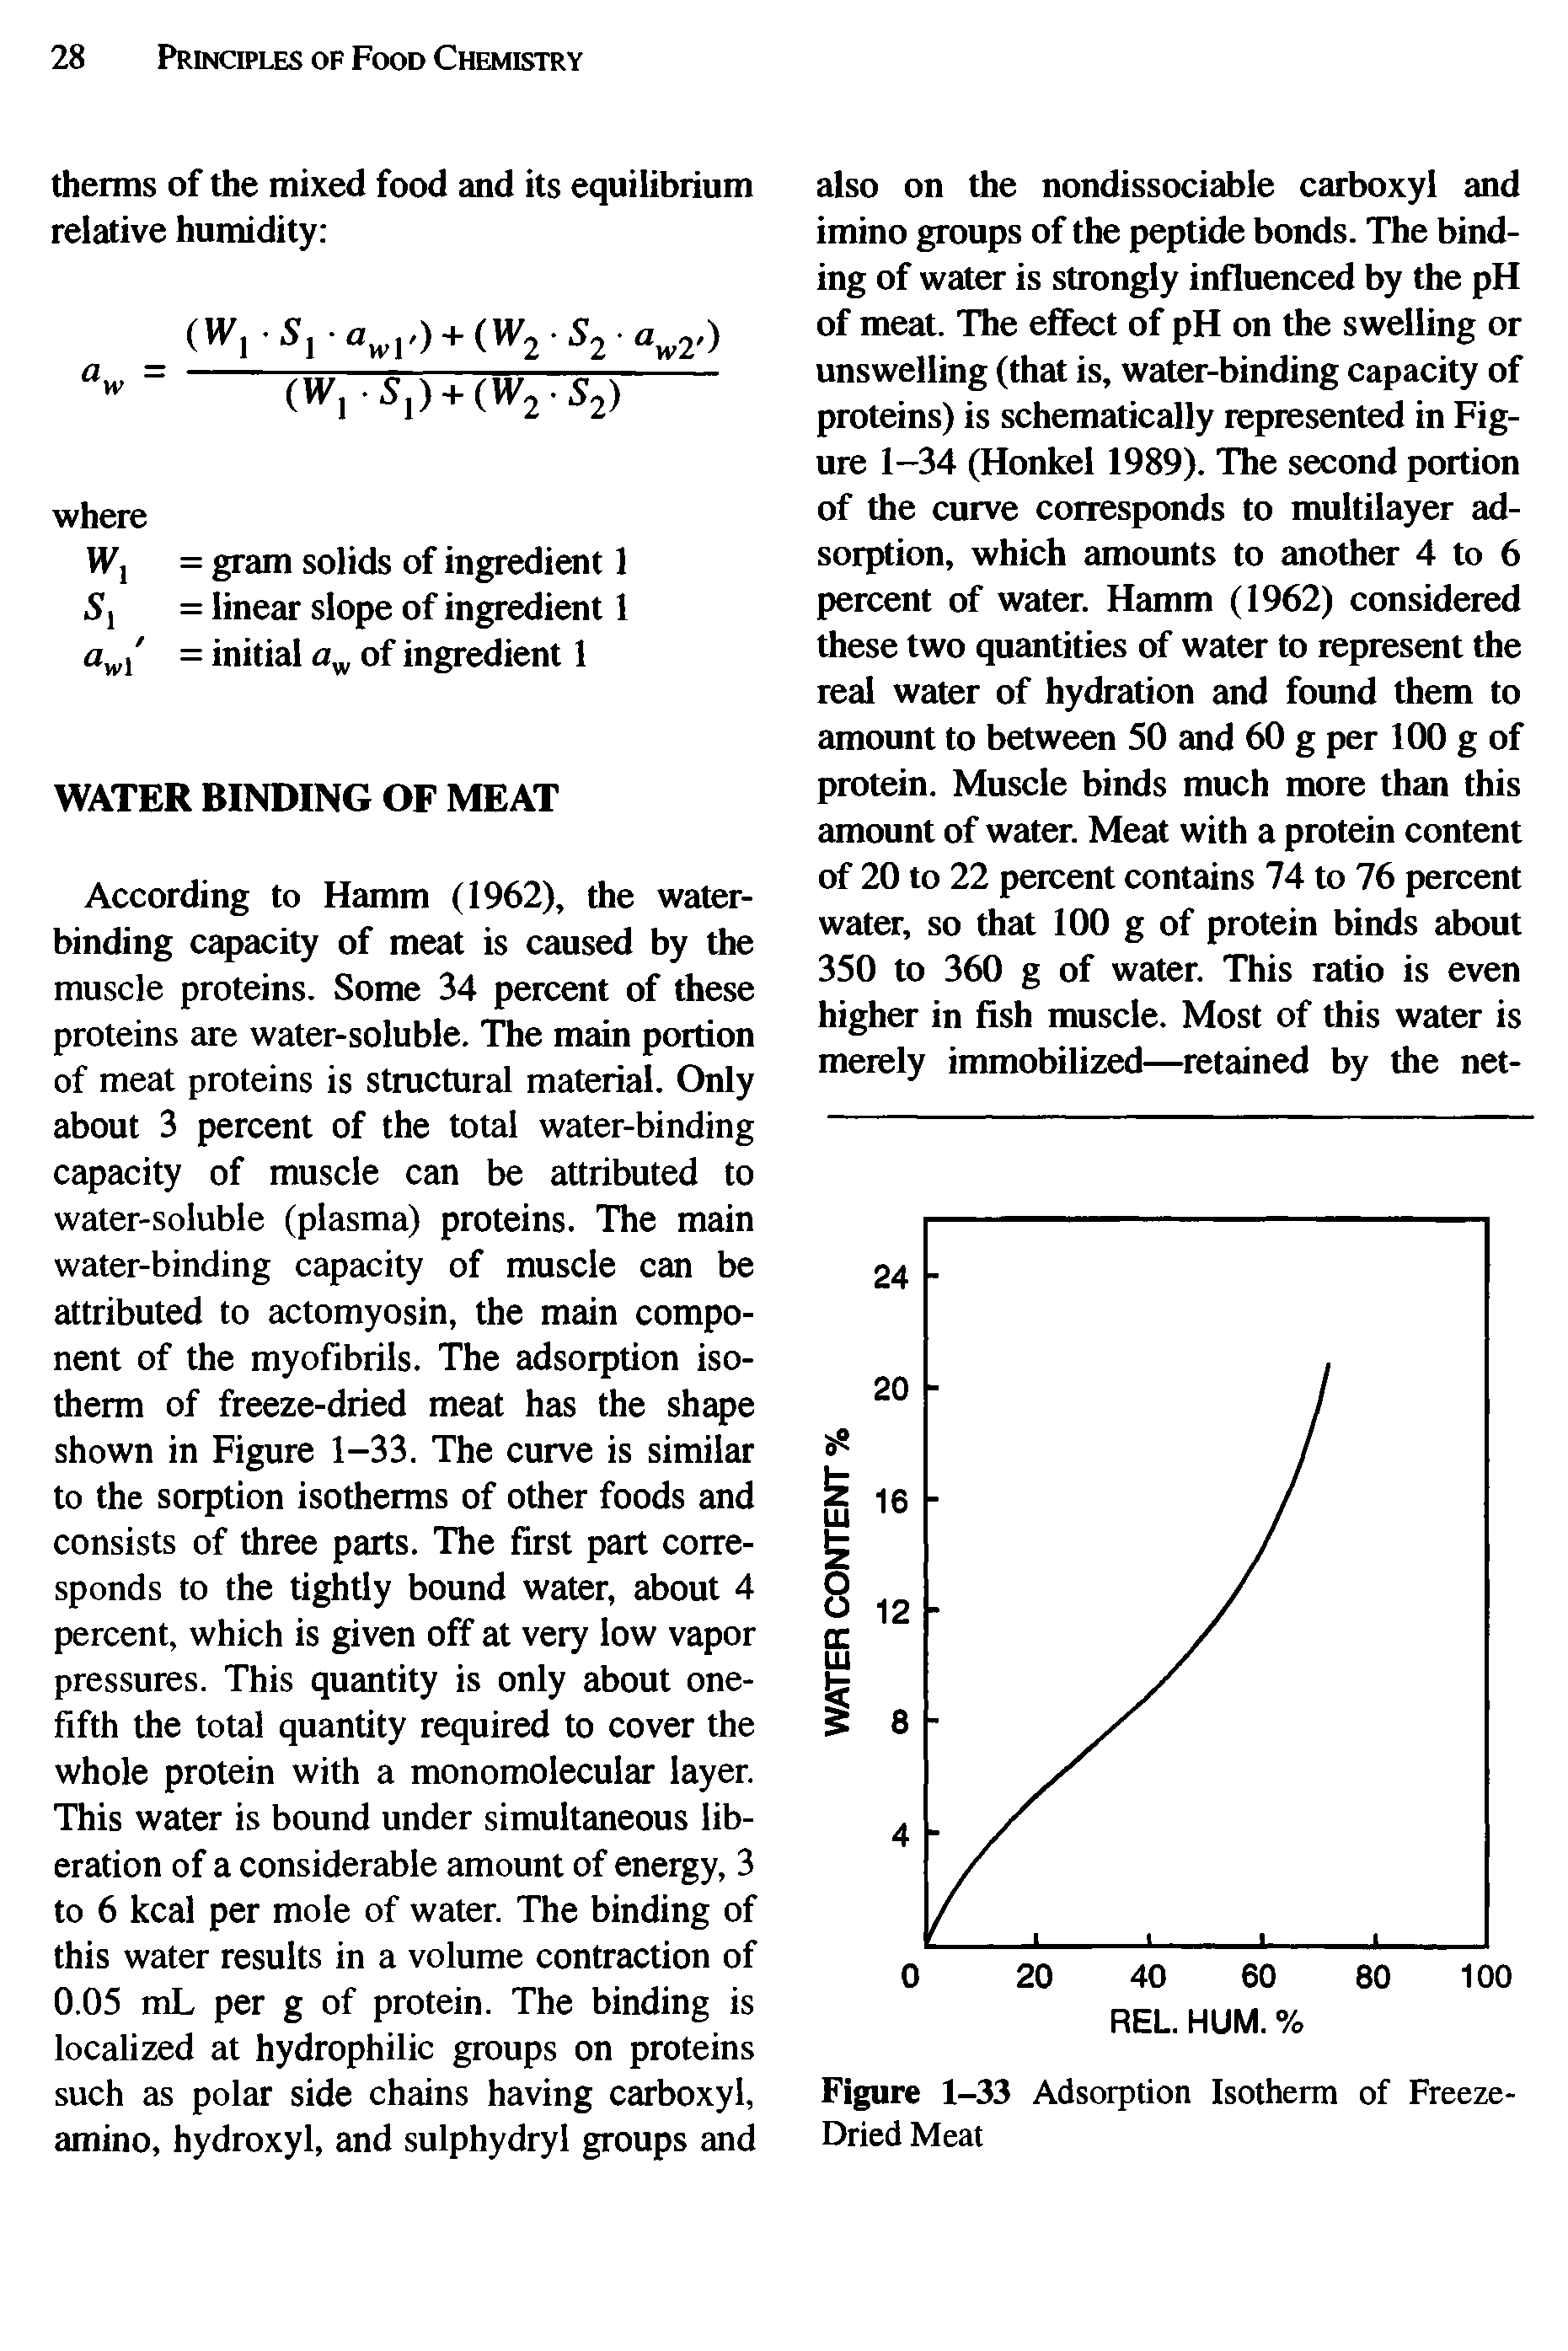 Figure 1-33 Adsorption Isotherm of Freeze-Dried Meat...